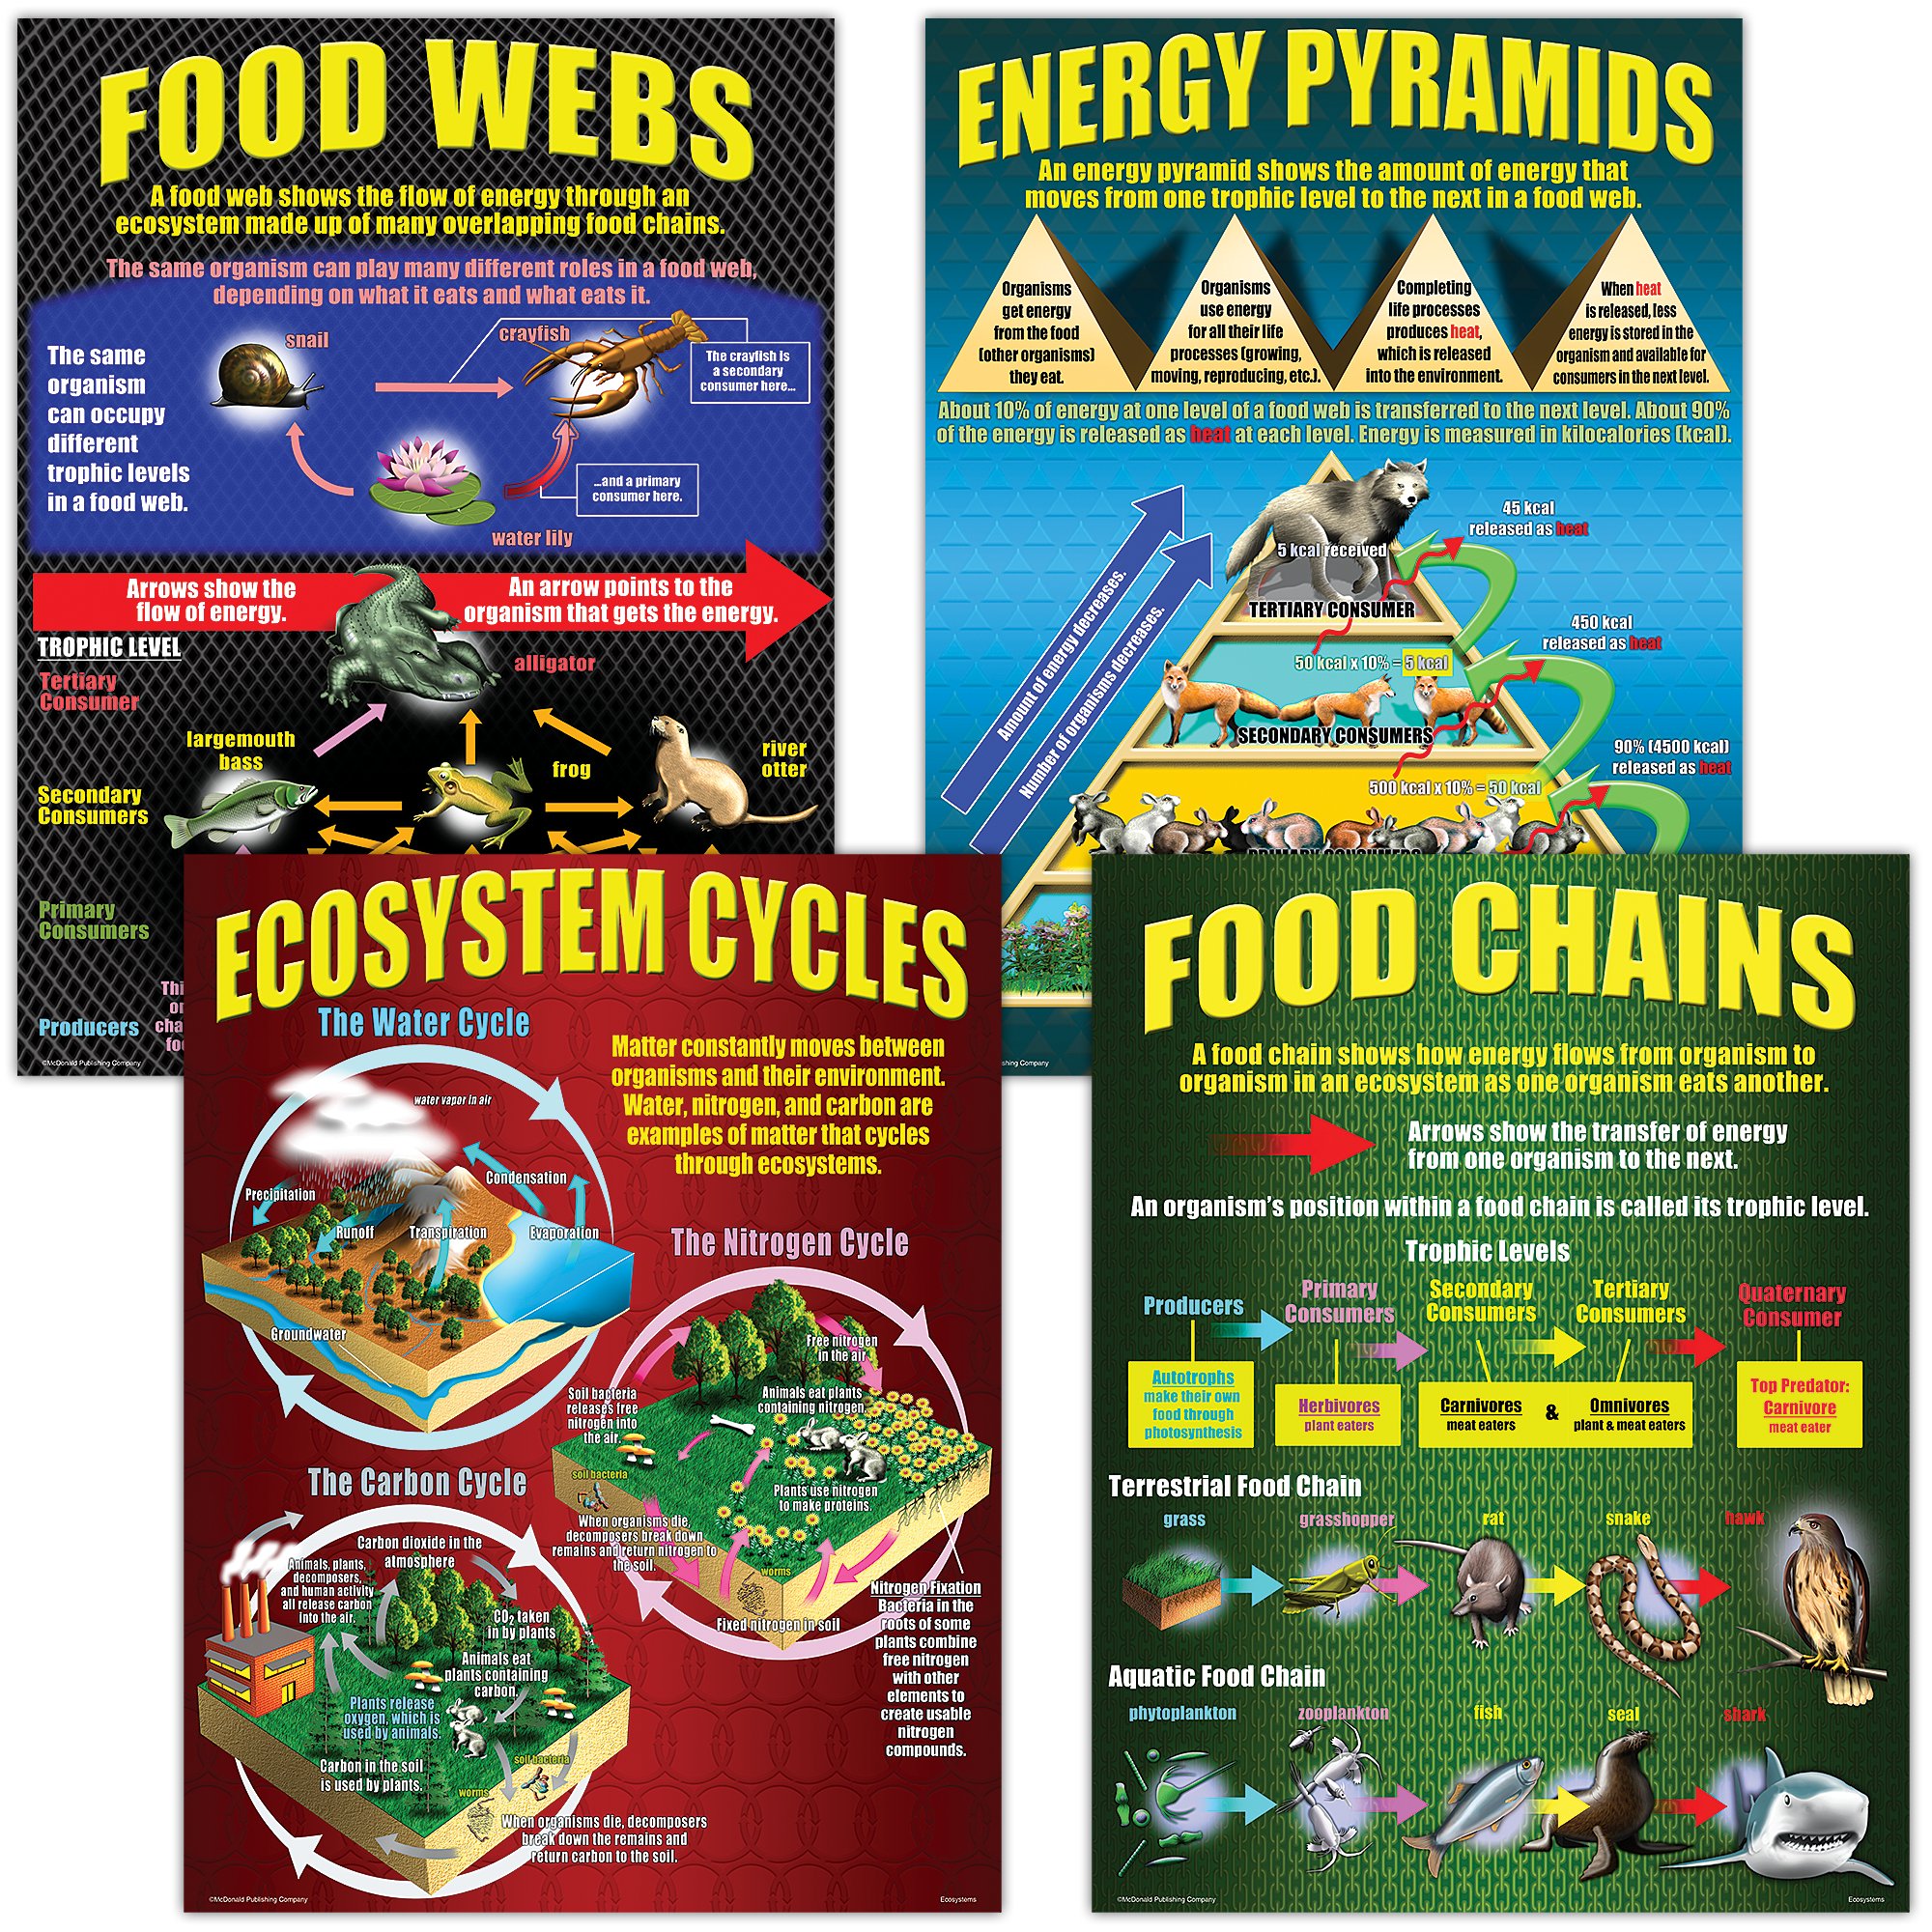 Posters focusing on food chains, food webs, and energy pyramids show students how energy moves through an ecosystem and the interactions between organisms within it. Cycle models show how matter flows through organisms and the physical environment. Package includes 4 posters, 4 reproducible activity sheets, and a helpful teacher’s guide.